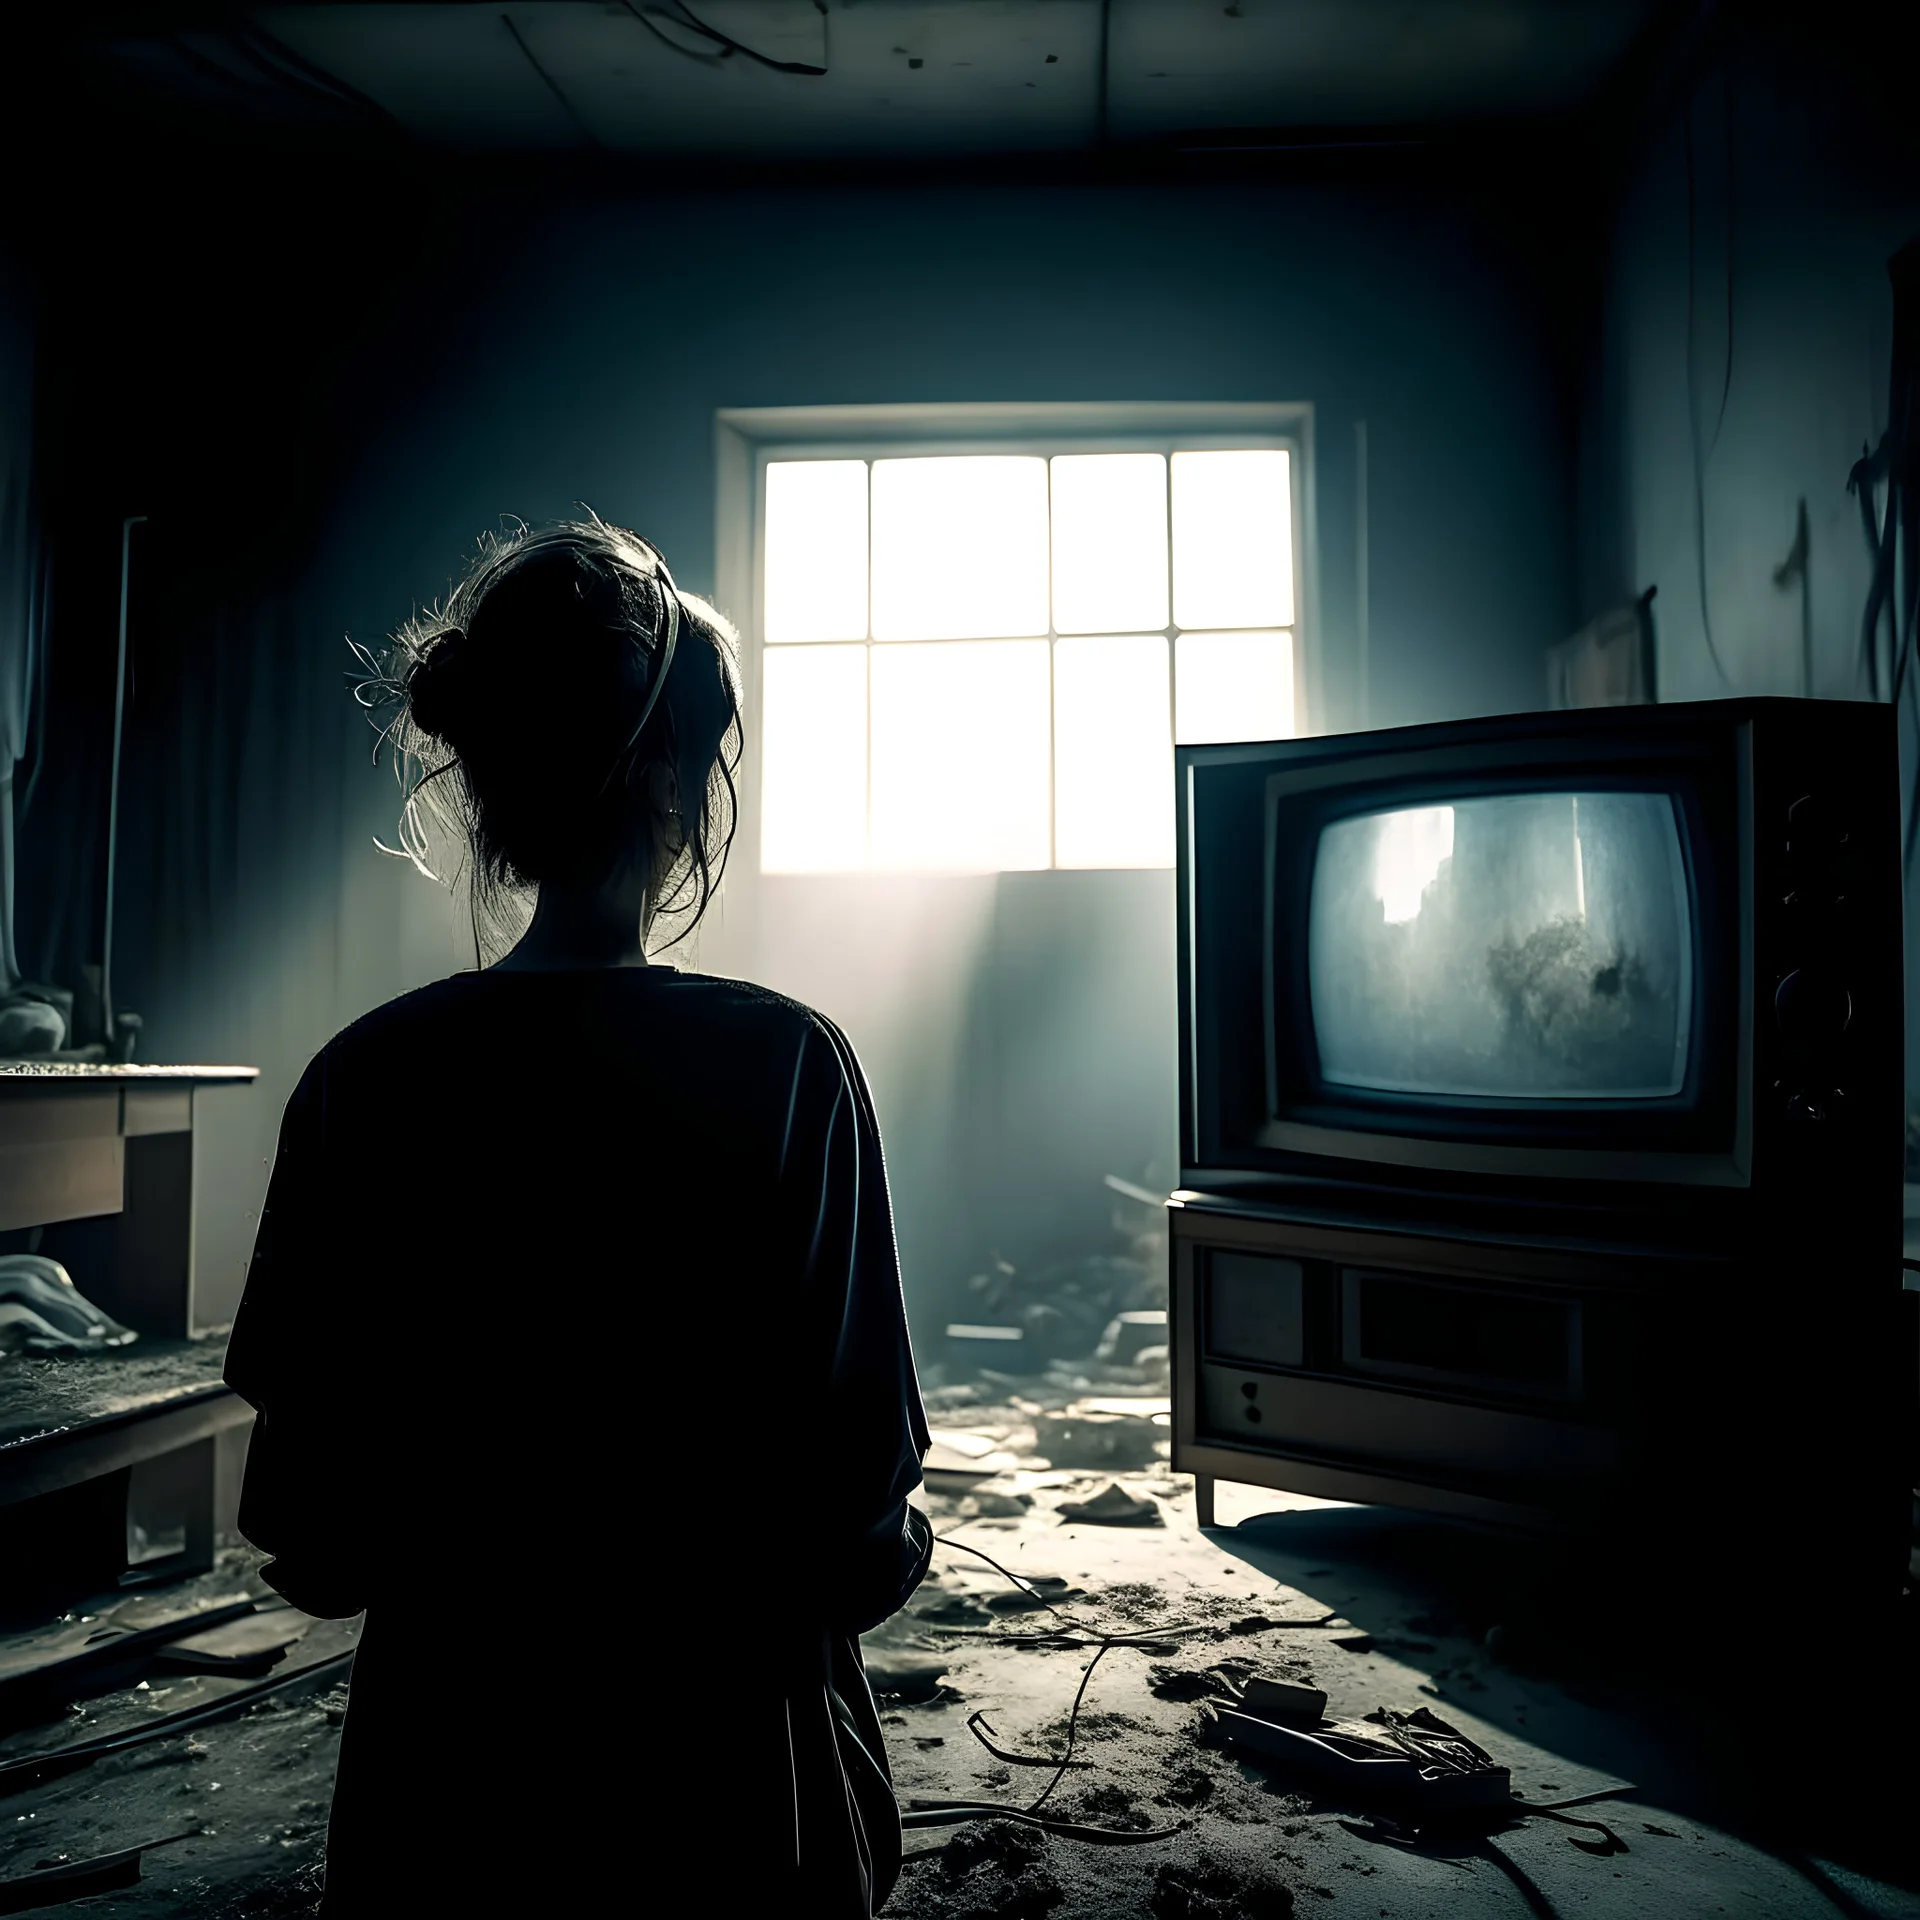 an epic, intricate, highly detailed and ultra realistic photography of a woman seen from behind-semi-profile looking at a television that is in front of her in an abandoned hospital room. water on the floor, candles, broken objects around, diffuse light, hazy atmosphere, smoke